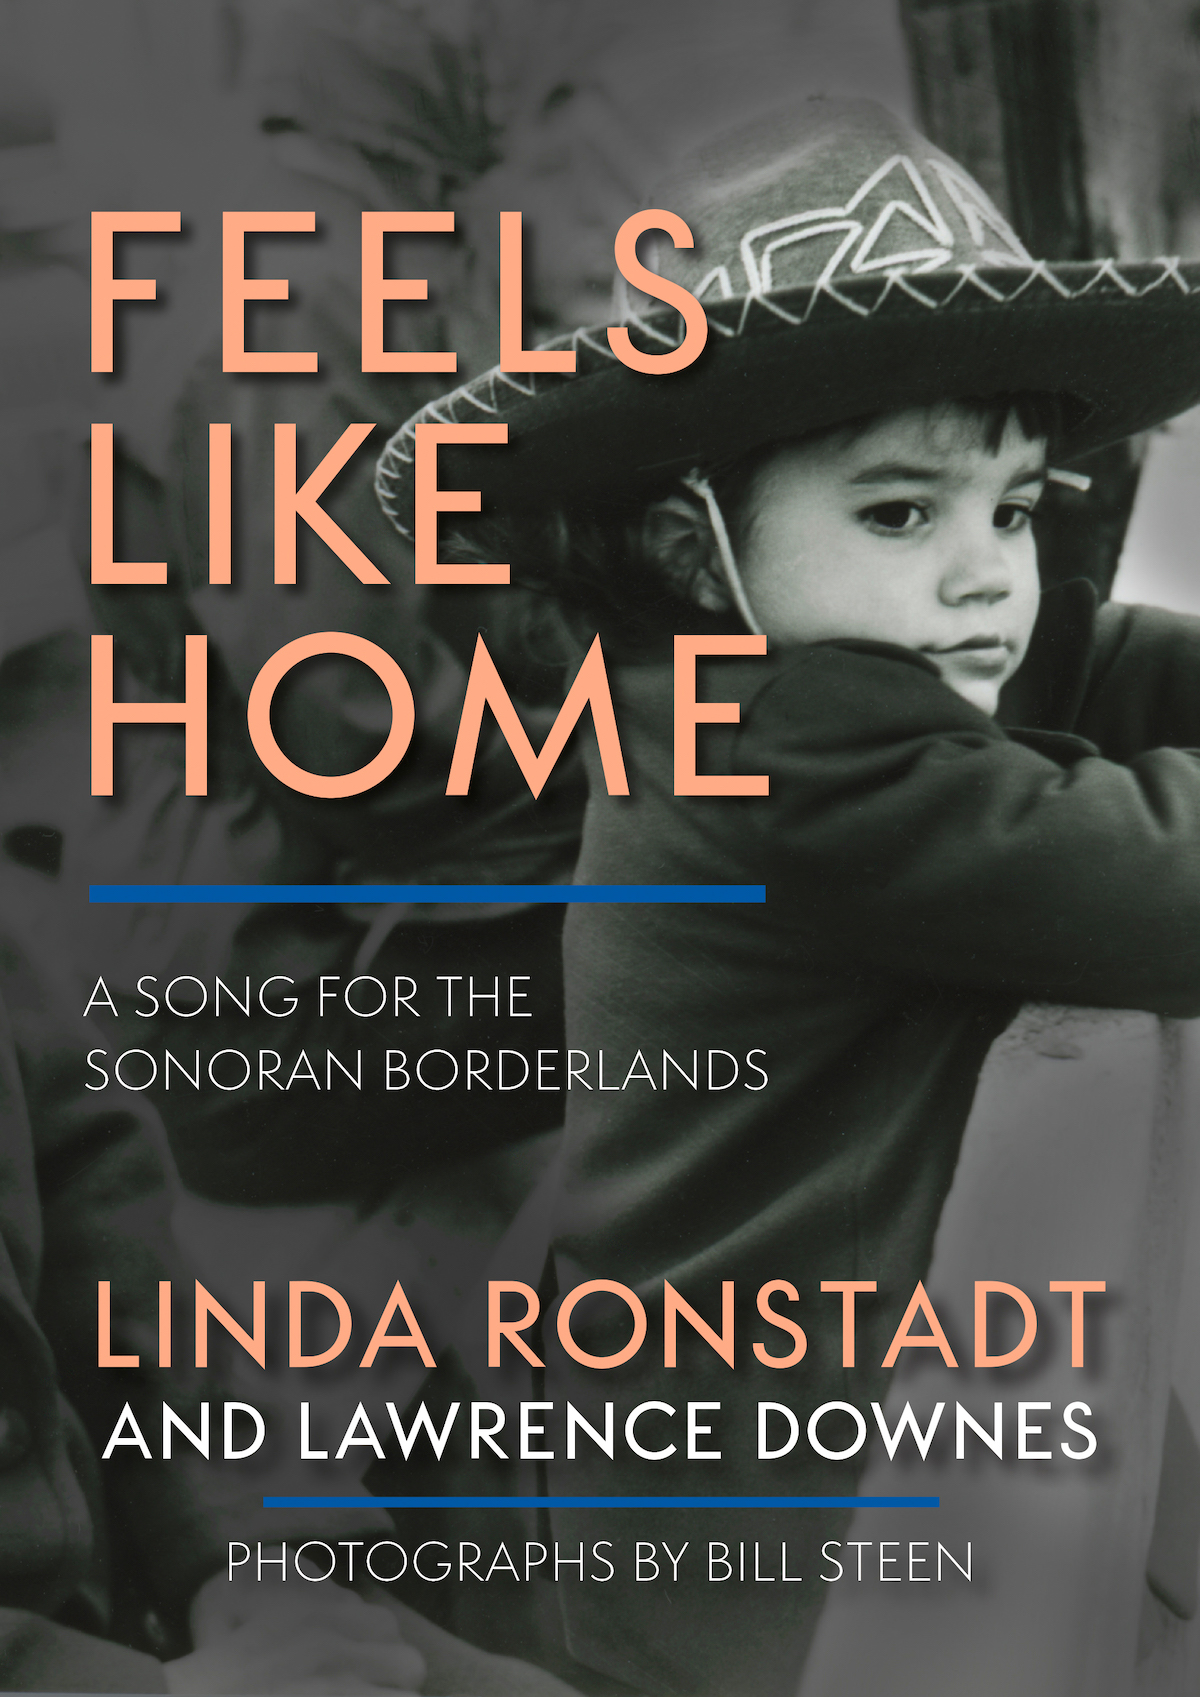 Cover of Feels Like Home: A Song for the Sonoran Borderlands by Linda Ronstadt and Lawrence Downes